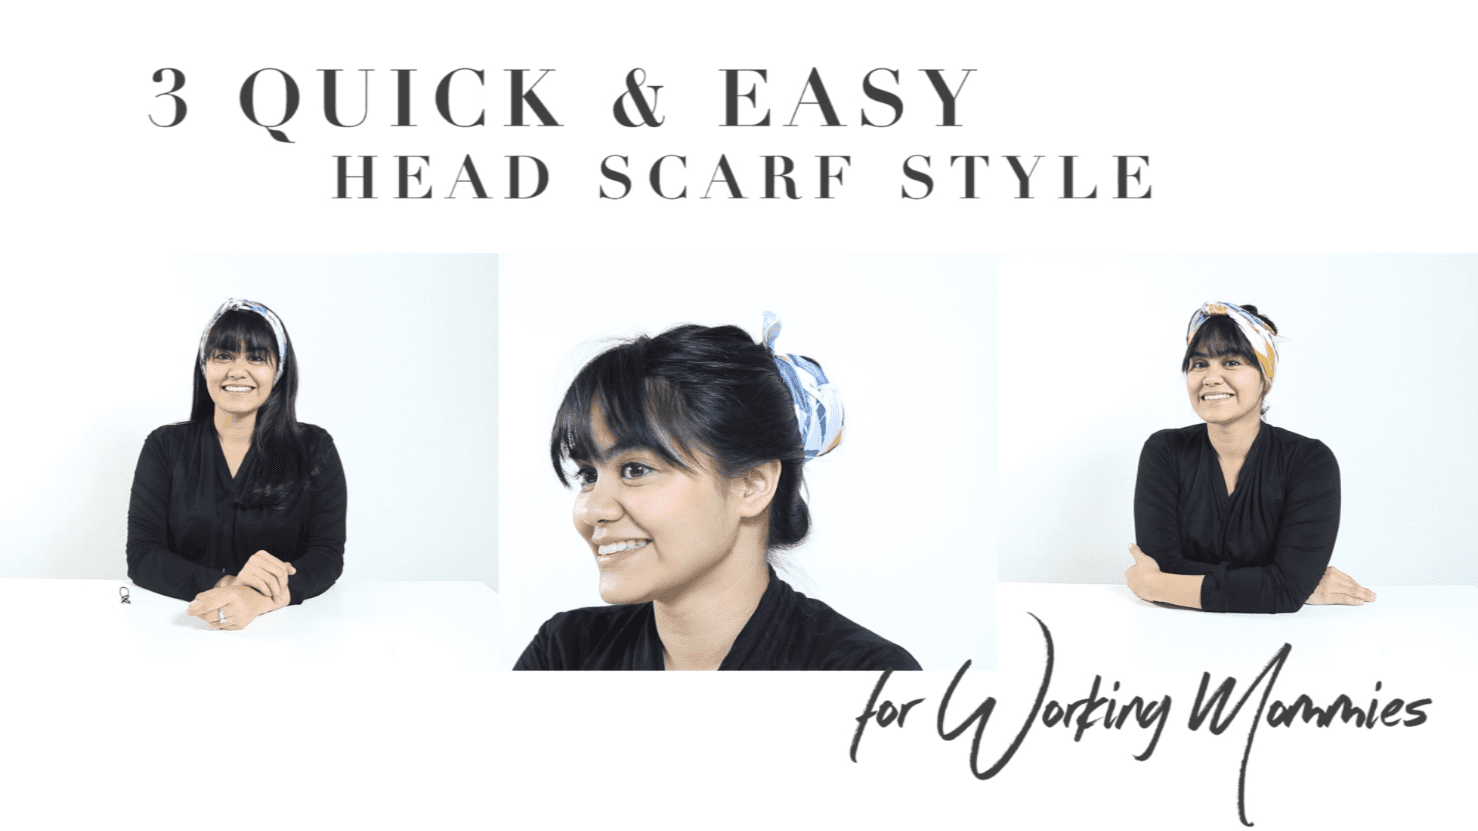 3 Quick & Easy Head Scarf Style for Working Mommies